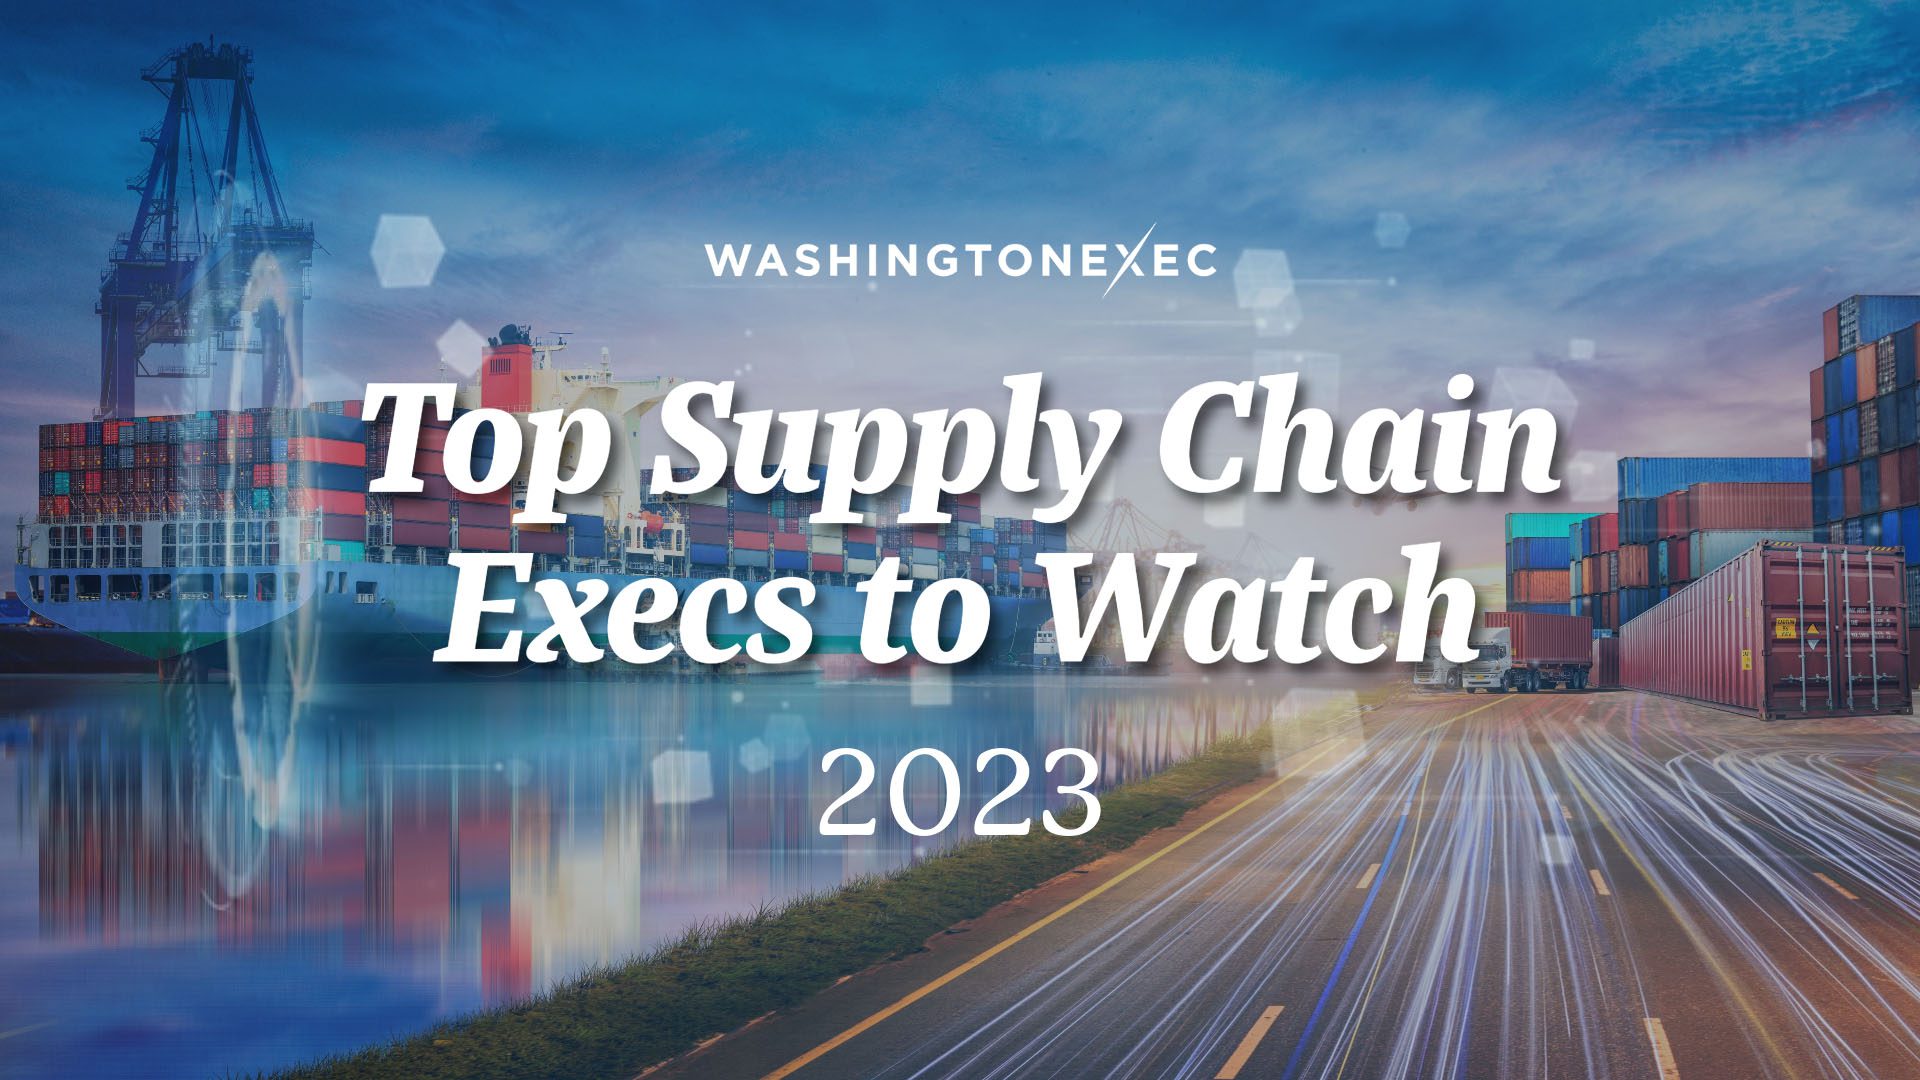 Top Supply Chain Execs to Watch 2023